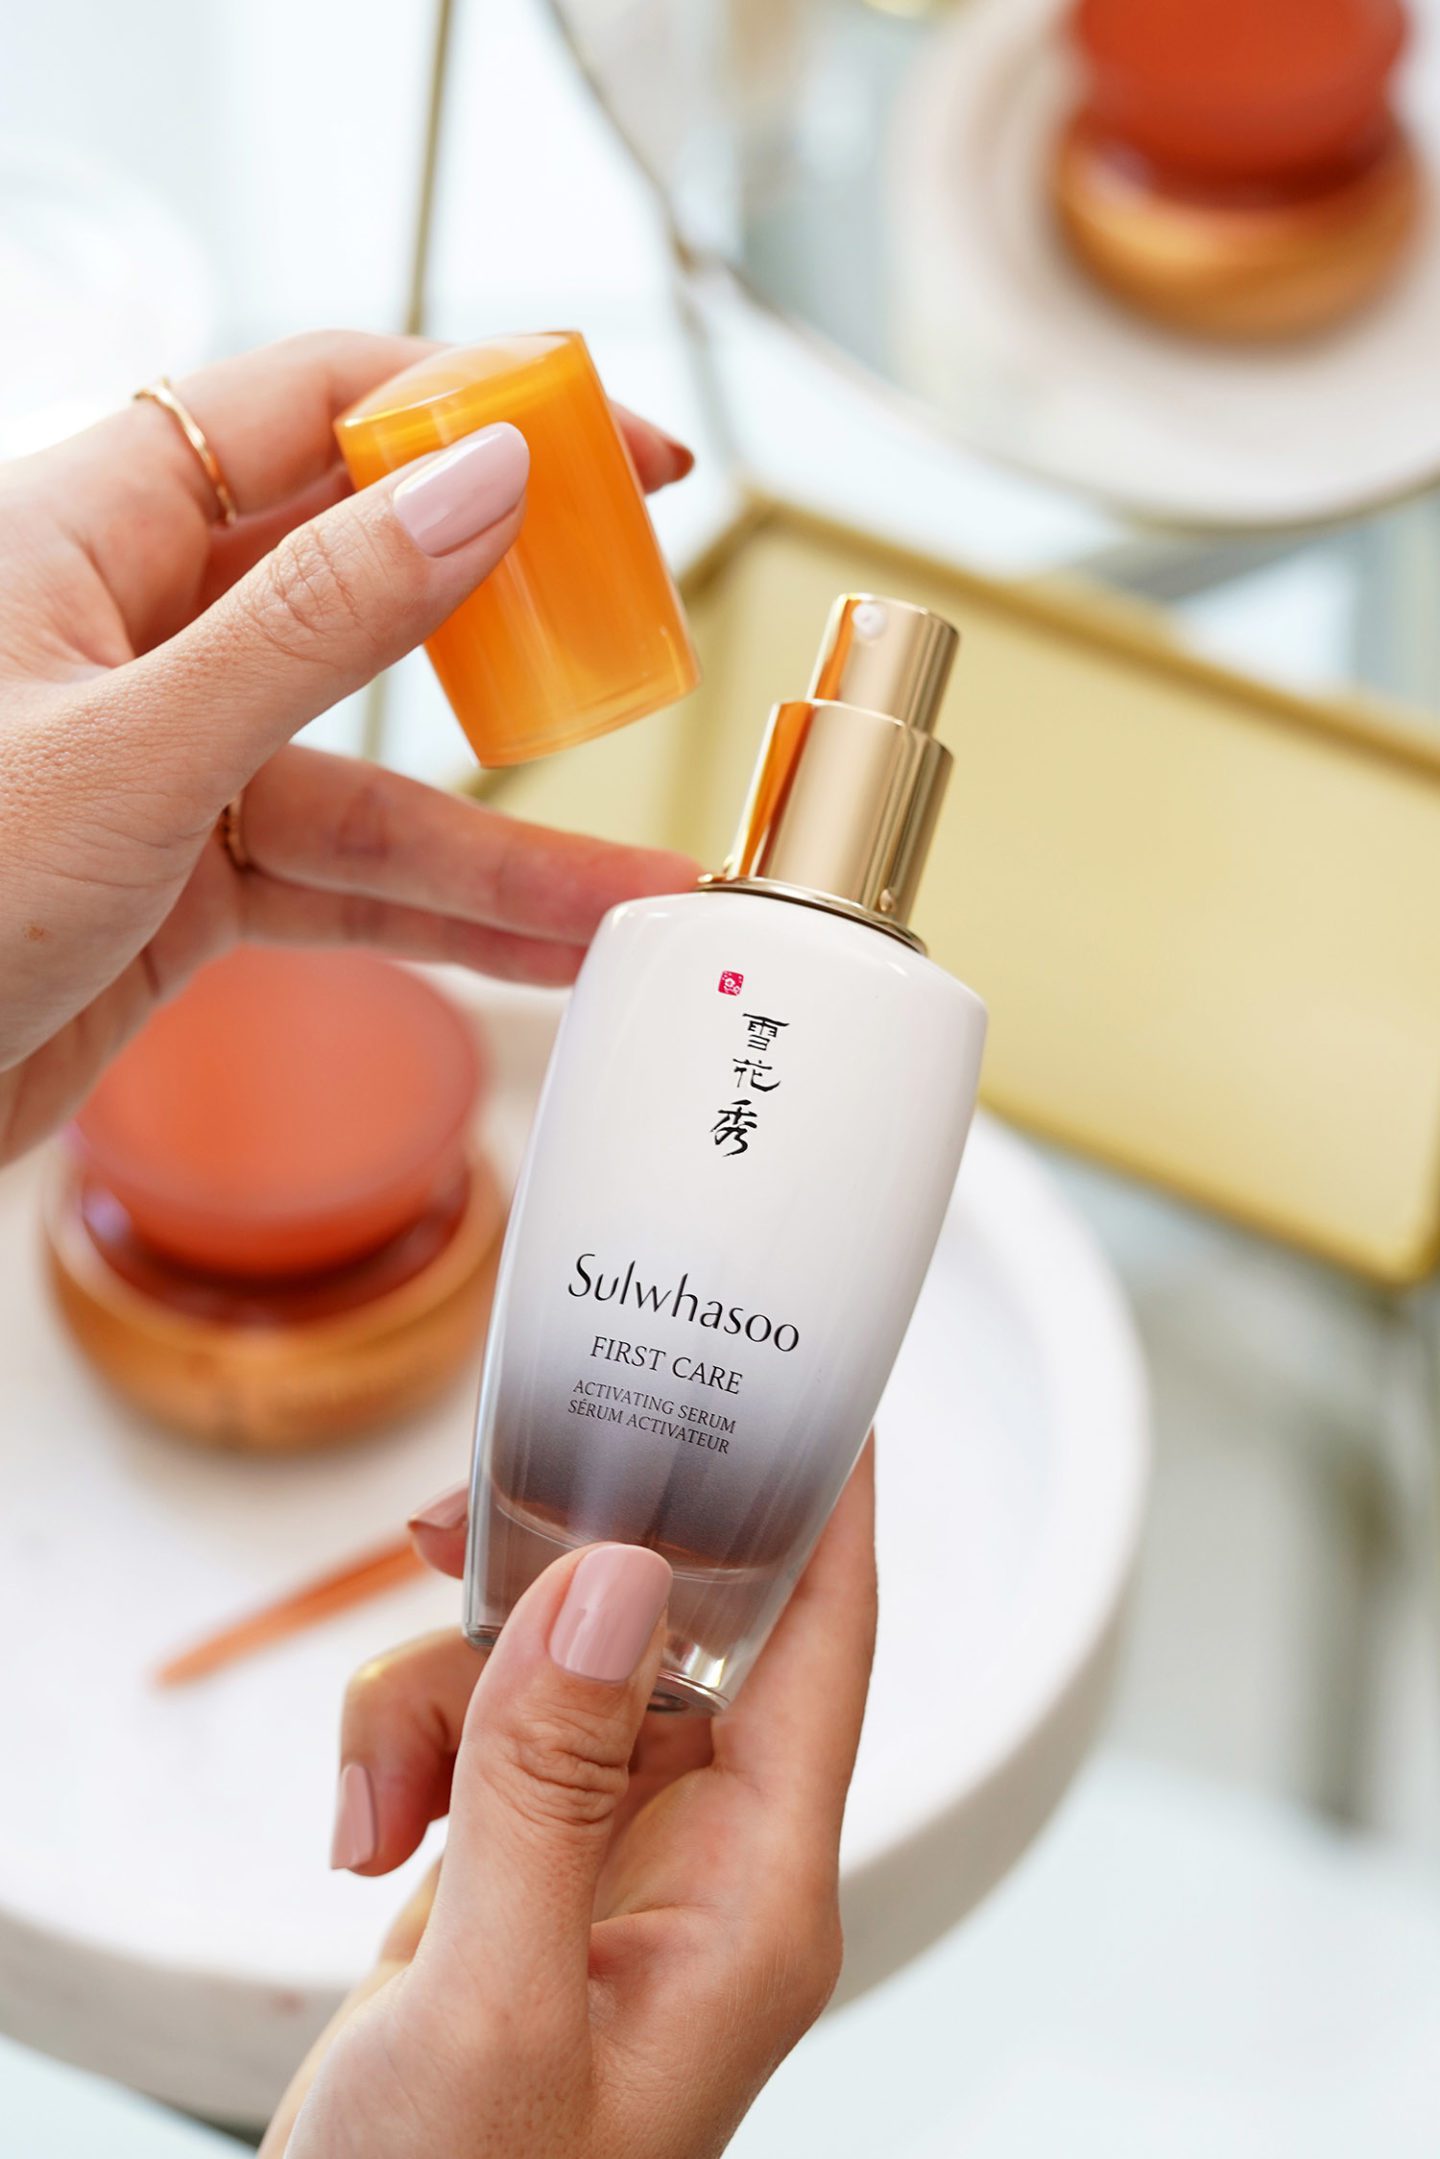 Sulwhasoo First Care Activating Serum 